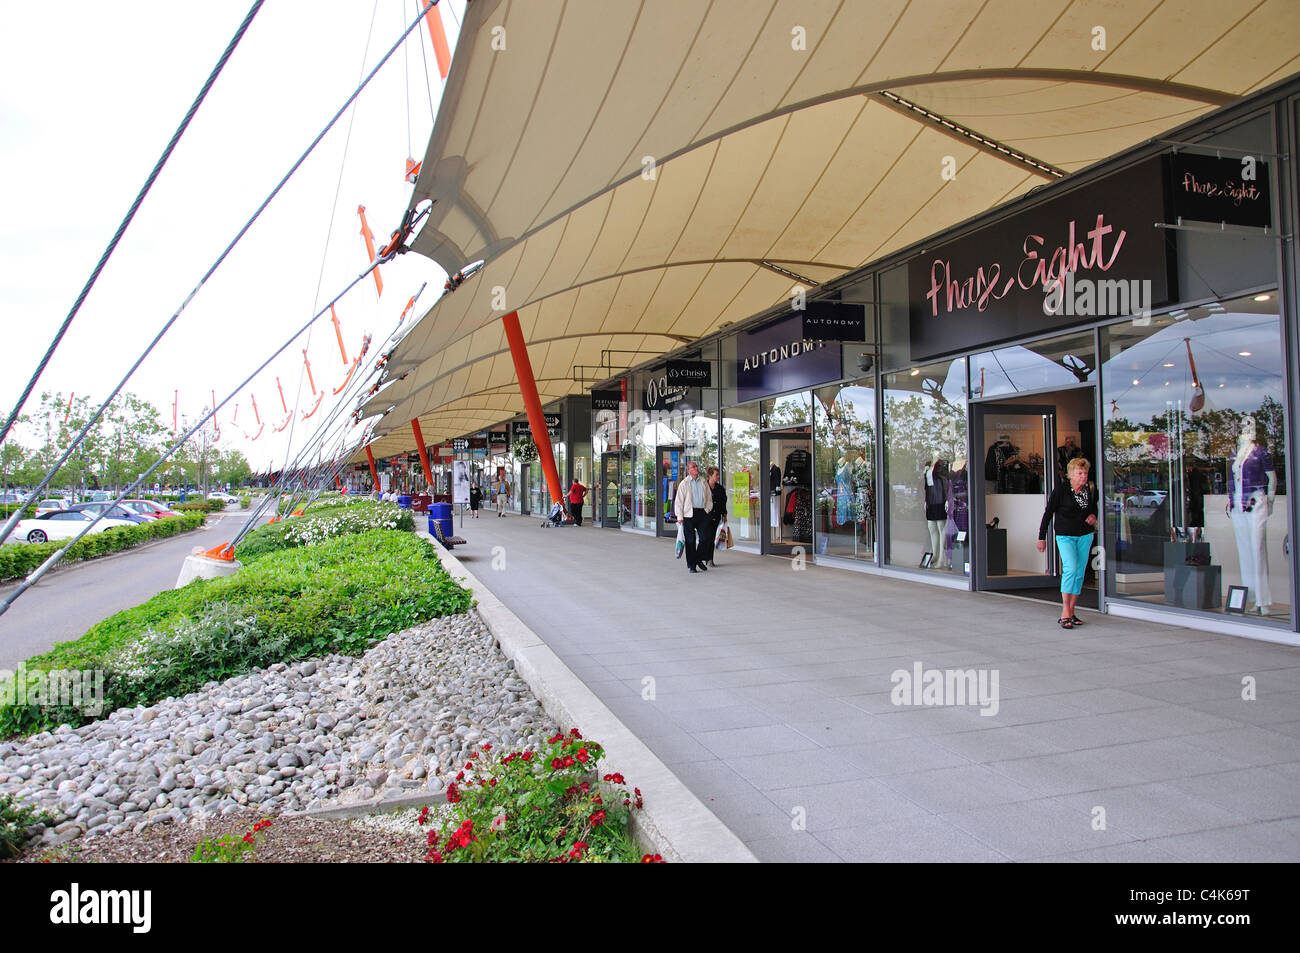 Ashford Outlet Stock Photos & Ashford Outlet Stock Images - Alamy